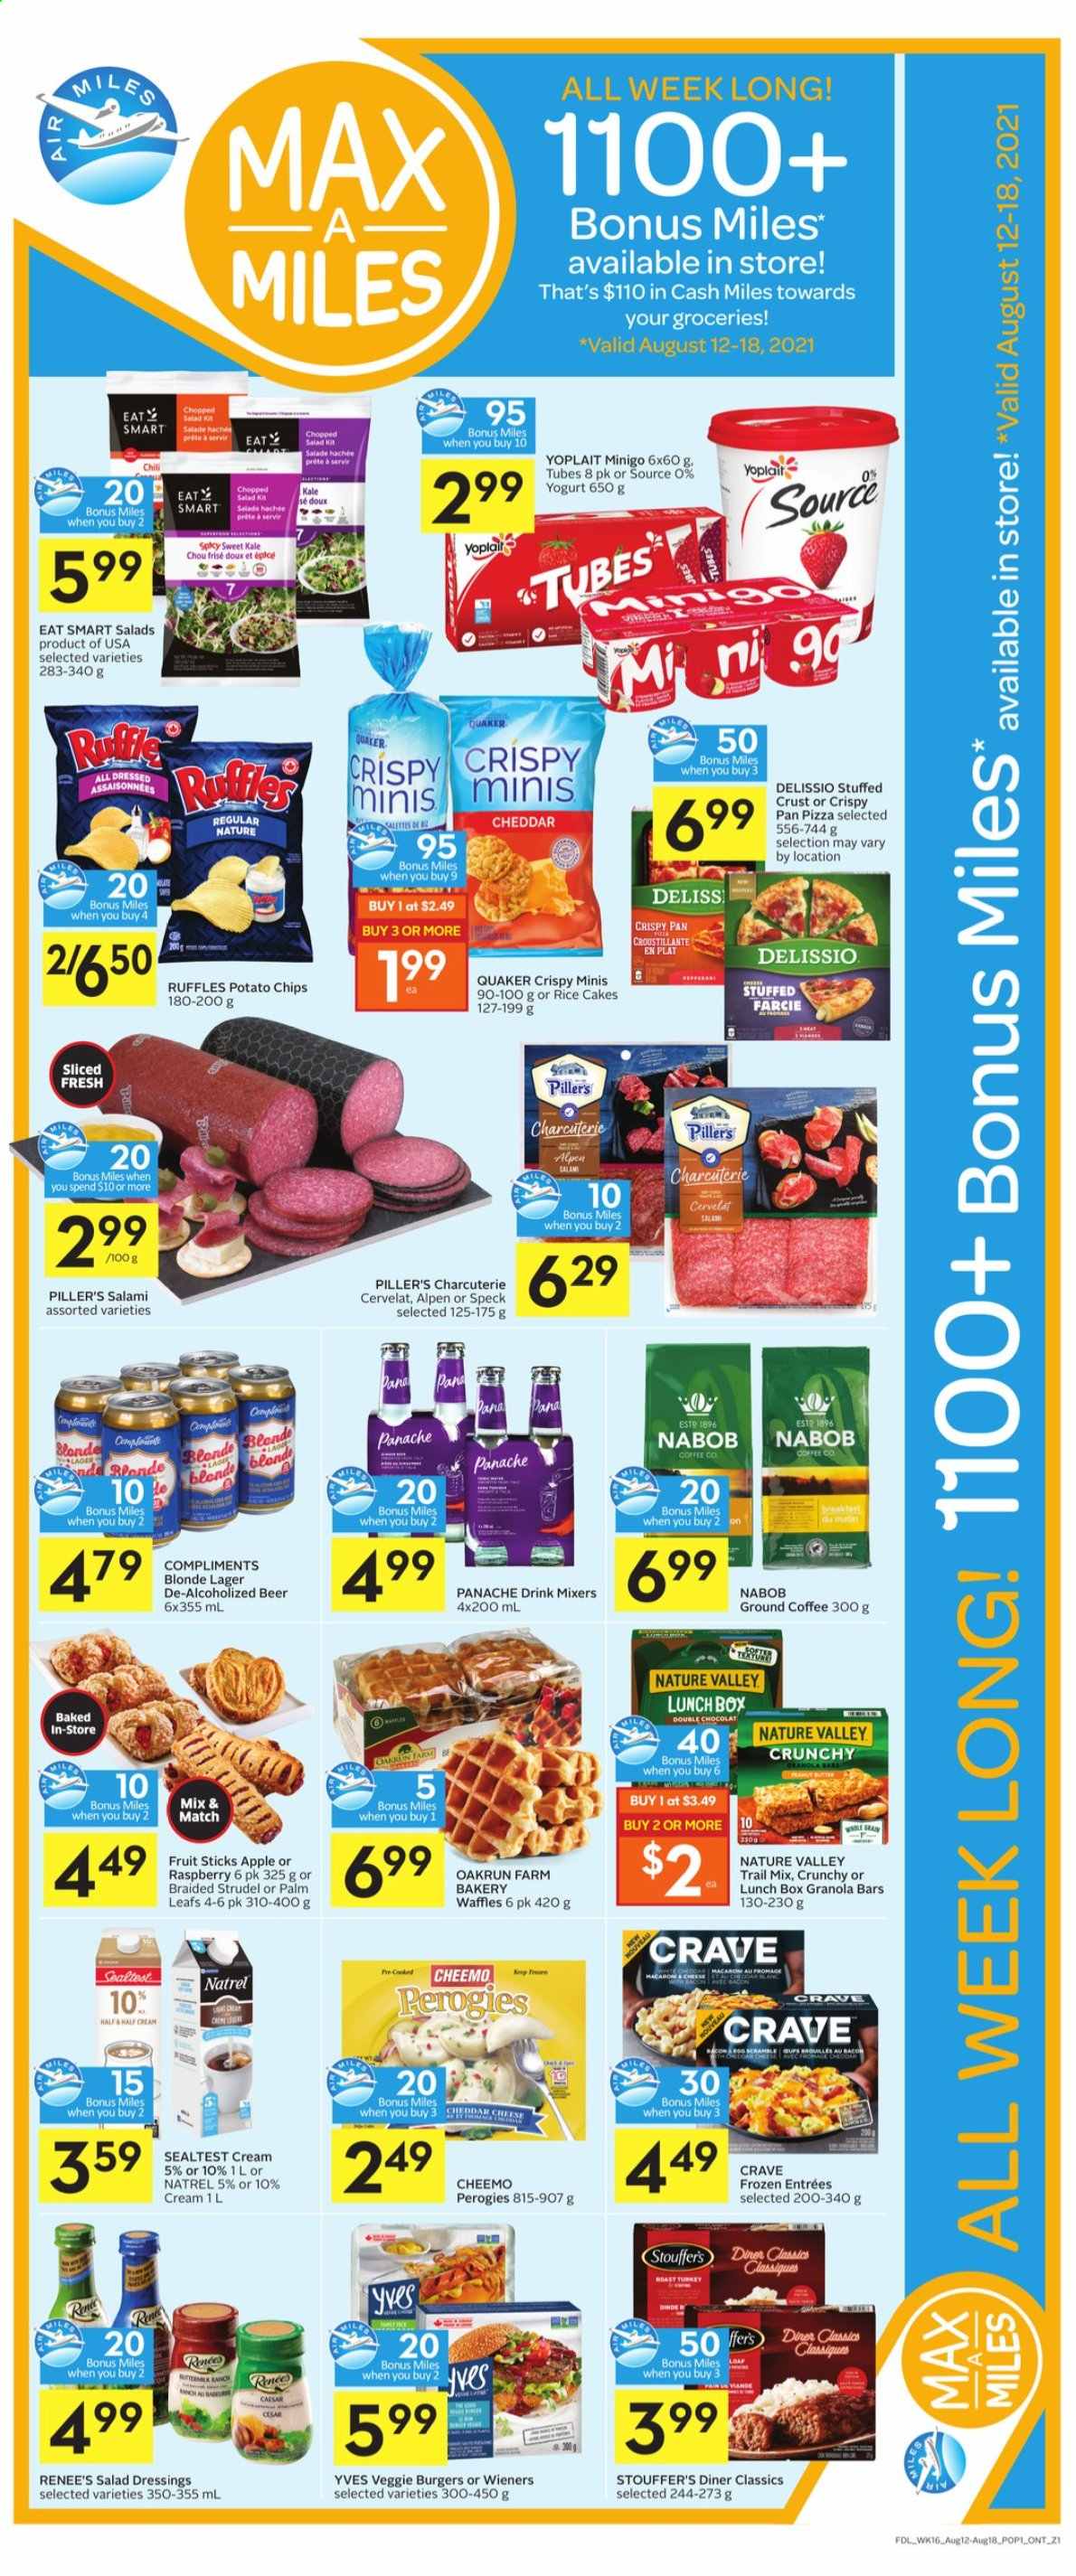 thumbnail - Foodland Flyer - August 12, 2021 - August 18, 2021 - Sales products - strudel, waffles, kale, chopped salad, pizza, Quaker, veggie burger, salami, yoghurt, Yoplait, Stouffer's, potato chips, Ruffles, granola bar, Nature Valley, salad dressing, trail mix, coffee, ground coffee, beer, Lager. Page 2.